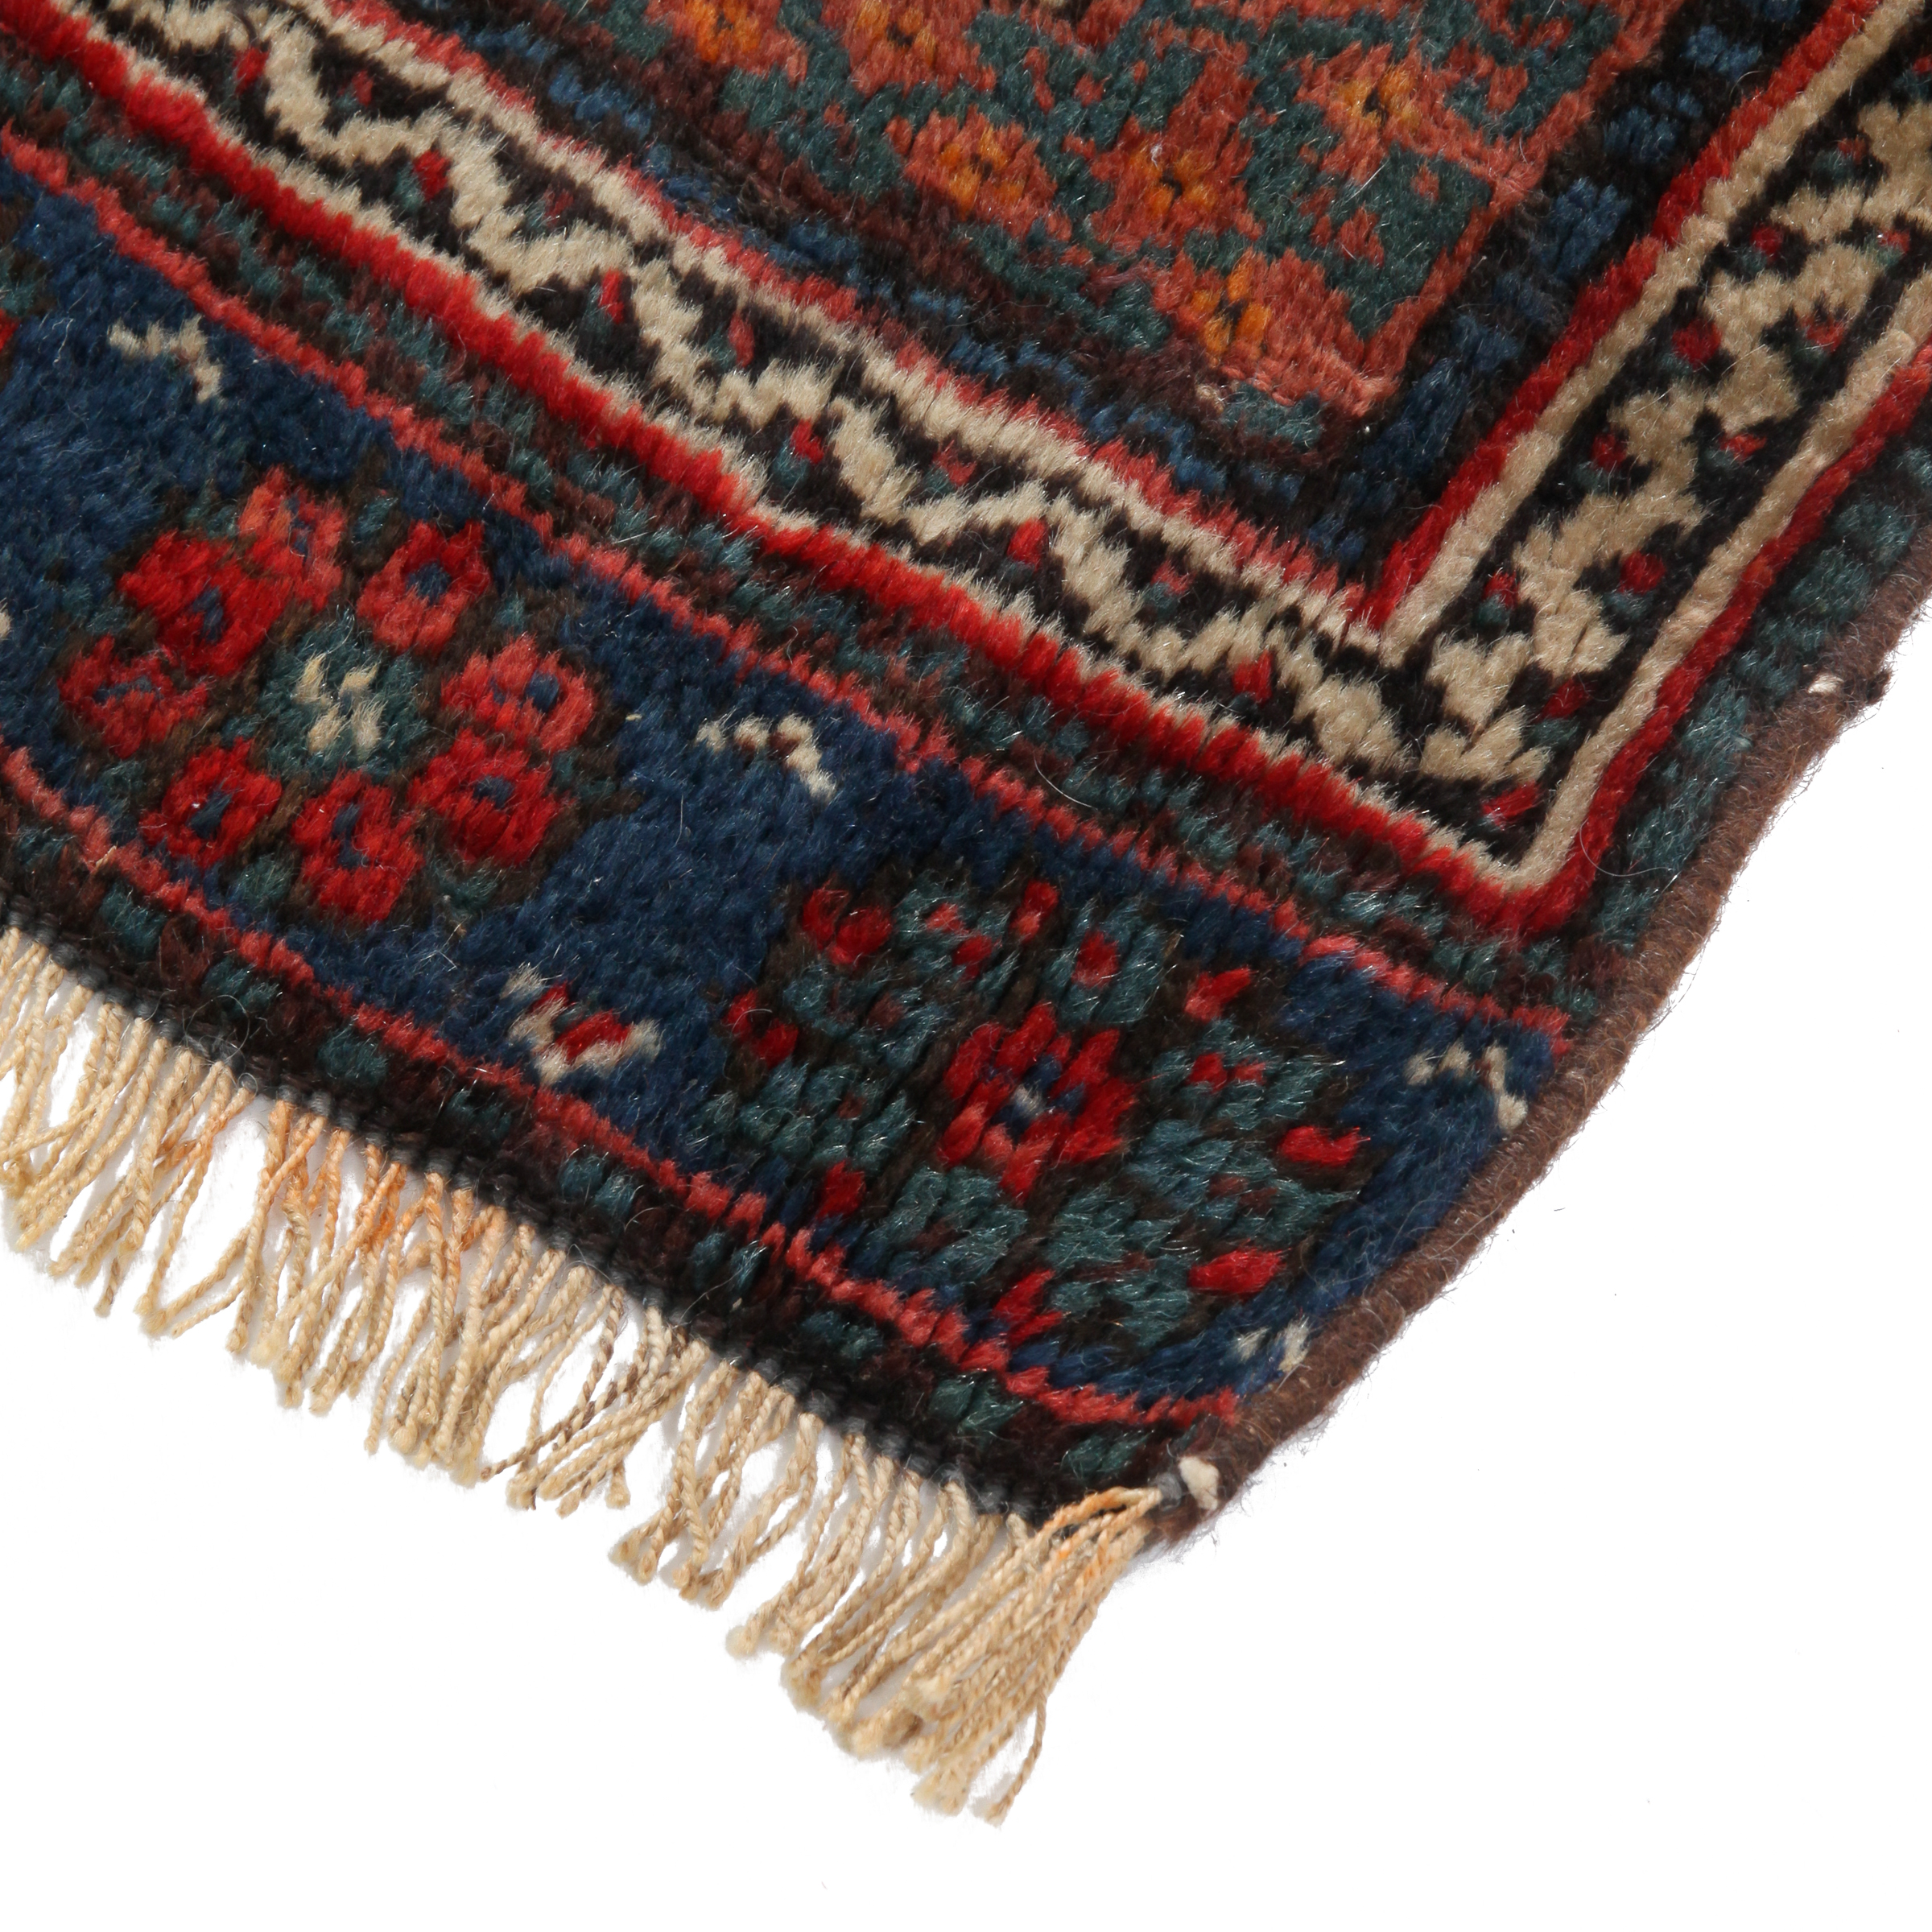 Jaff Kurd Bag Face together with a Caucasian Mat, both early 20th century